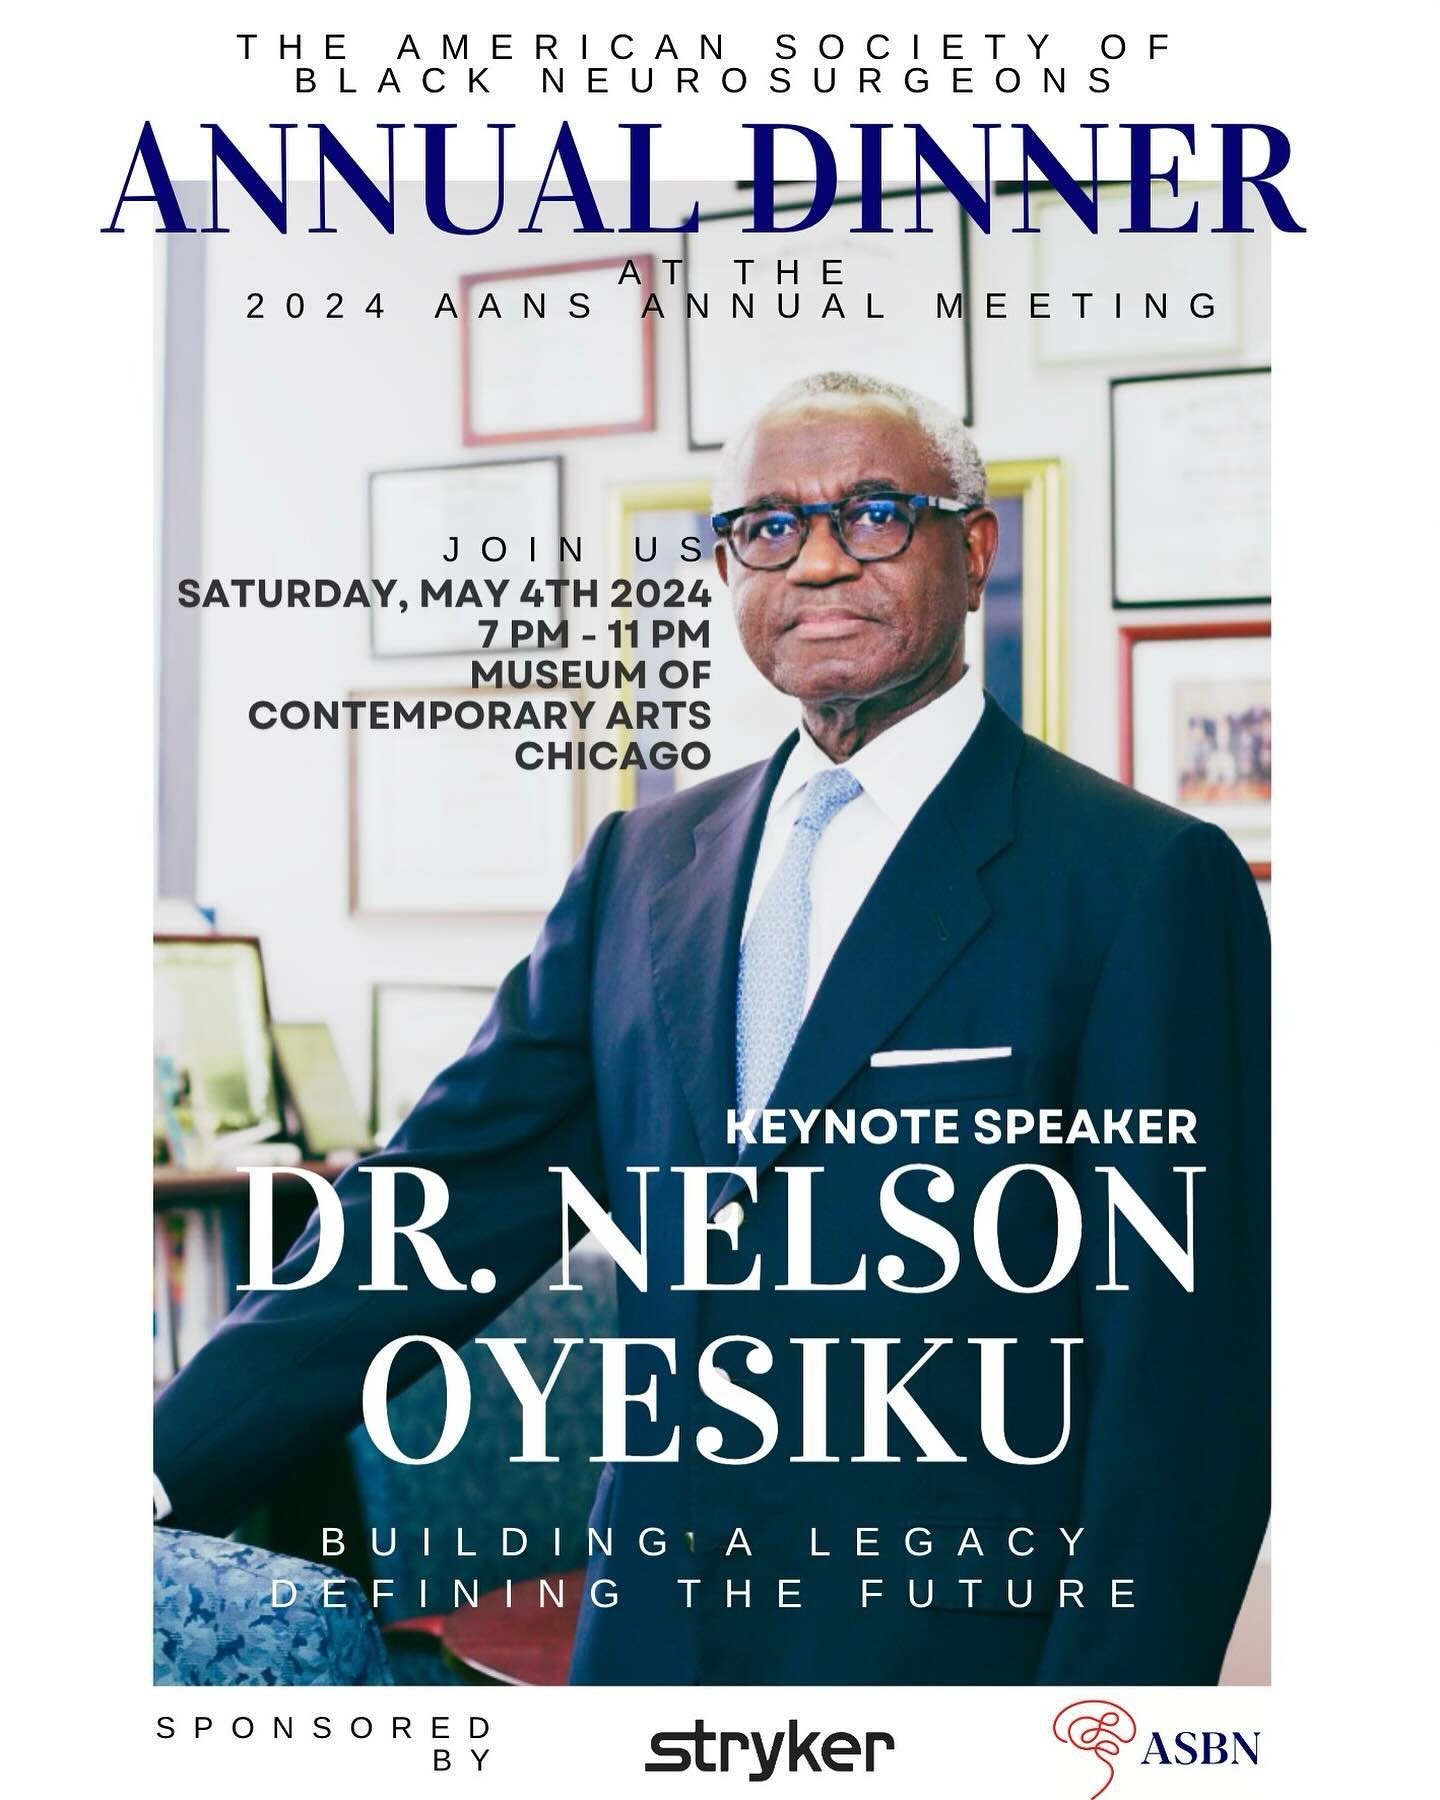 Last call to RSVP is tomorrow! 📣

We are so excited for our upcoming ASBN Annual AANS Dinner Event, proudly sponsored by @stryker_neurosurgical on May 4, 2024, from 7:00 to 11:00 PM CST.

We are honored to announce Dr. Nelson Oyesiku as this year&rs